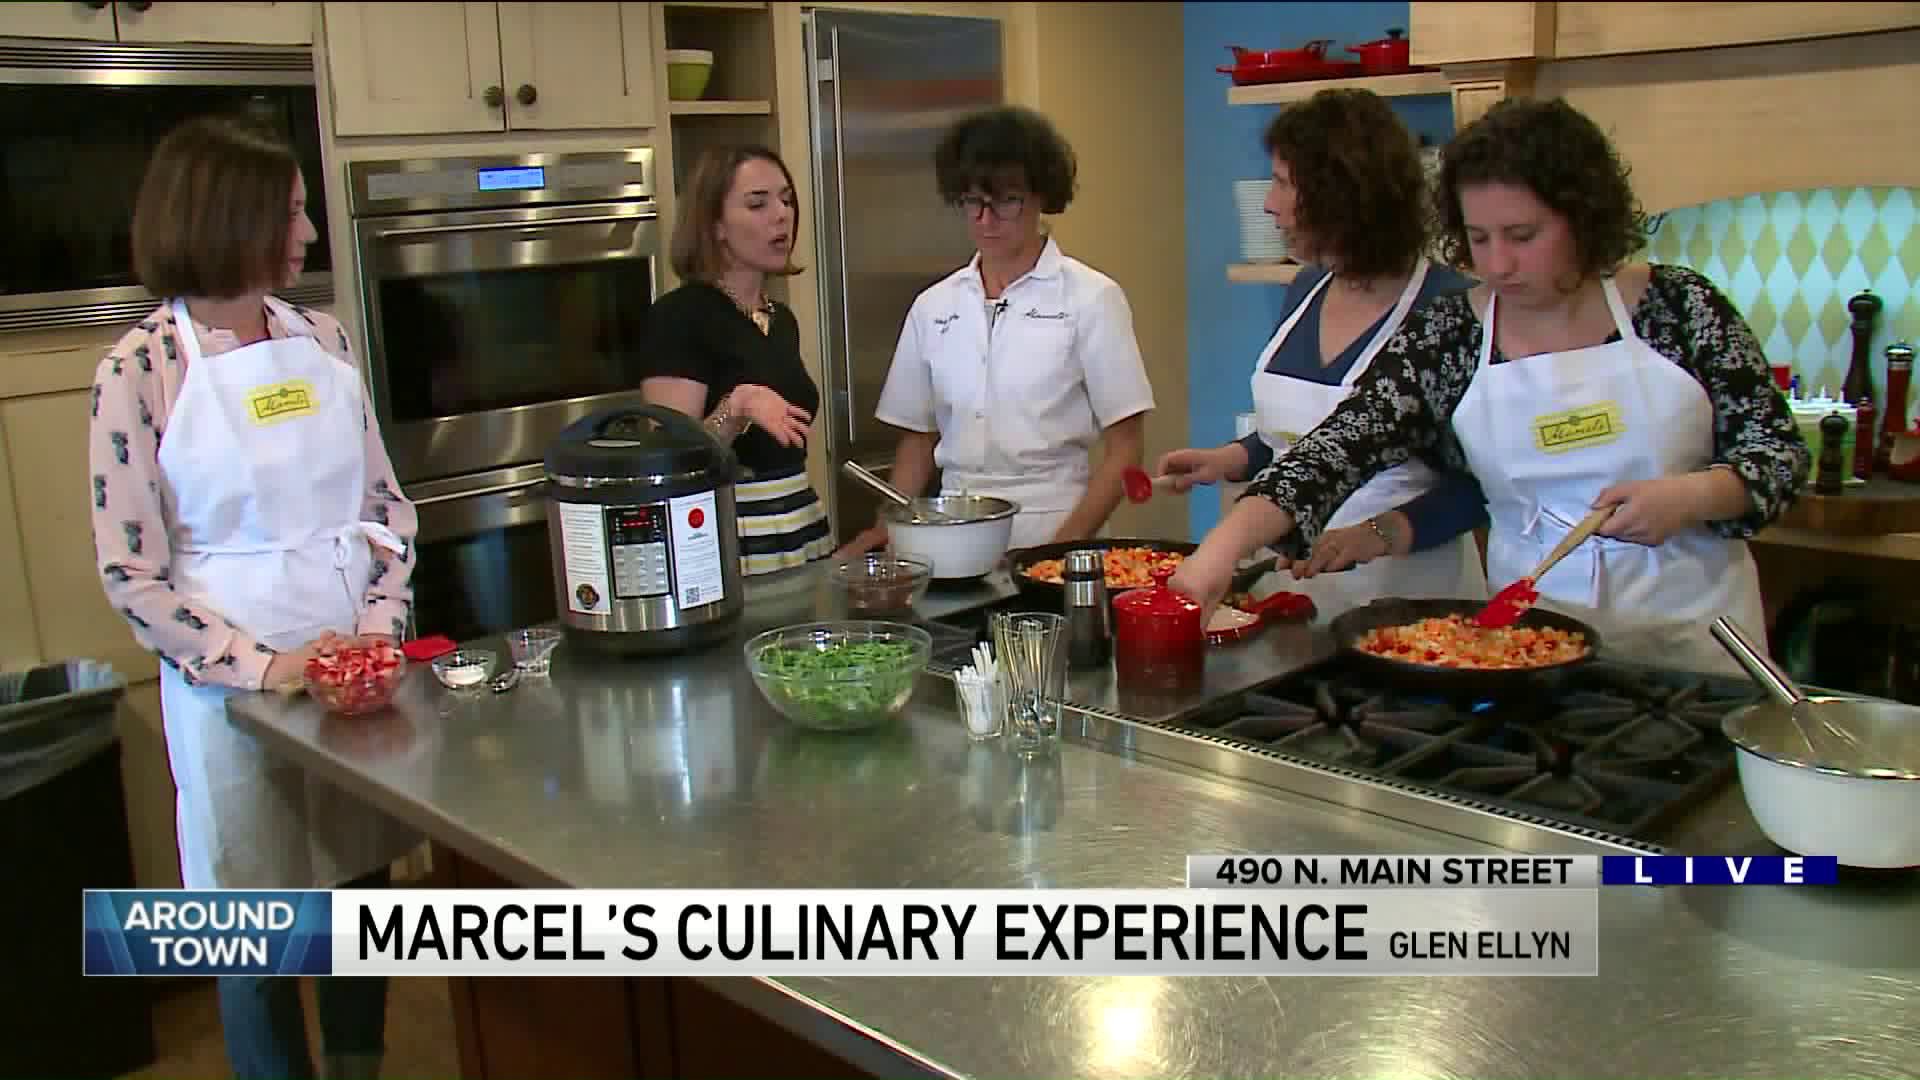 Around Town checks out Marcel’s Culinary Experience